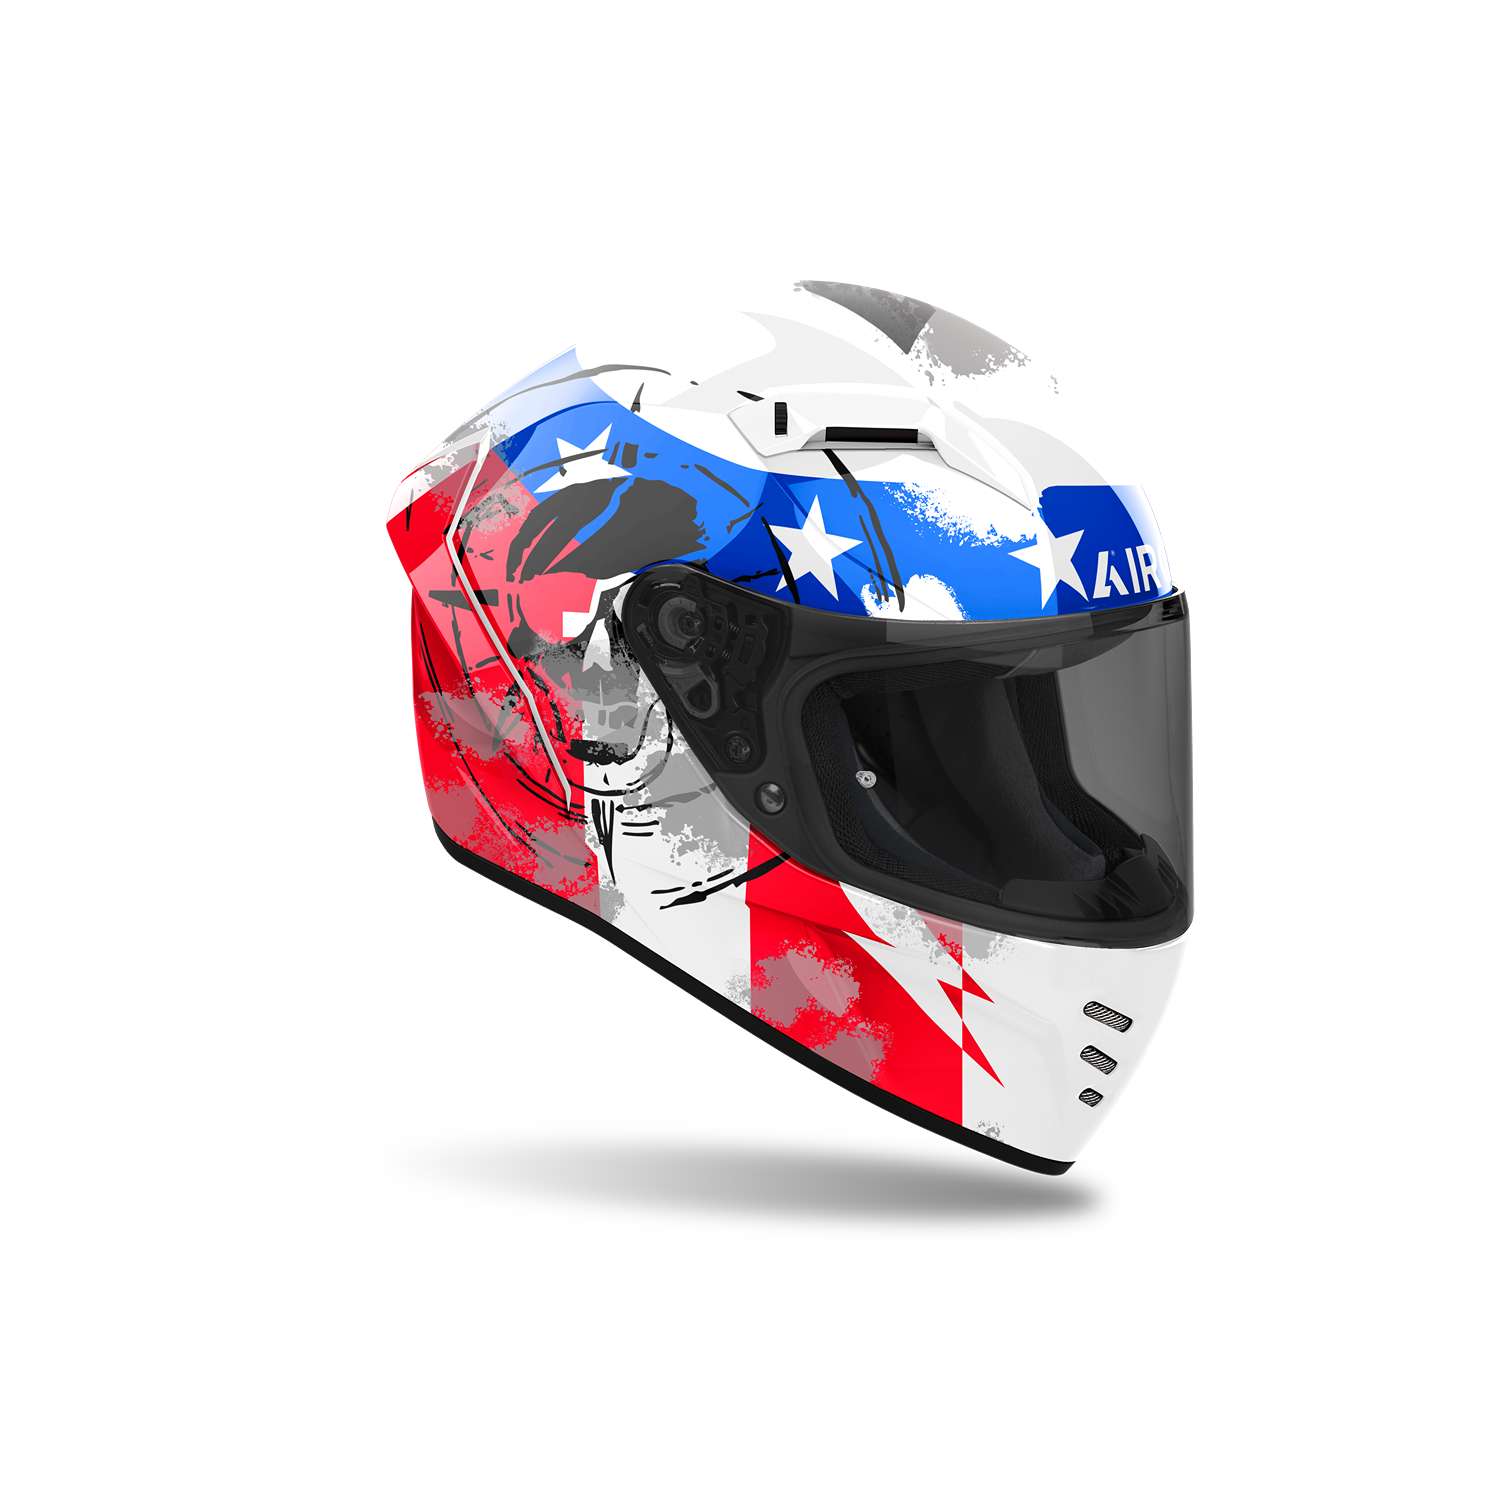 Image of Airoh Helmet Connor Nation Full Face Helmet Size 2XL ID 8029243355748